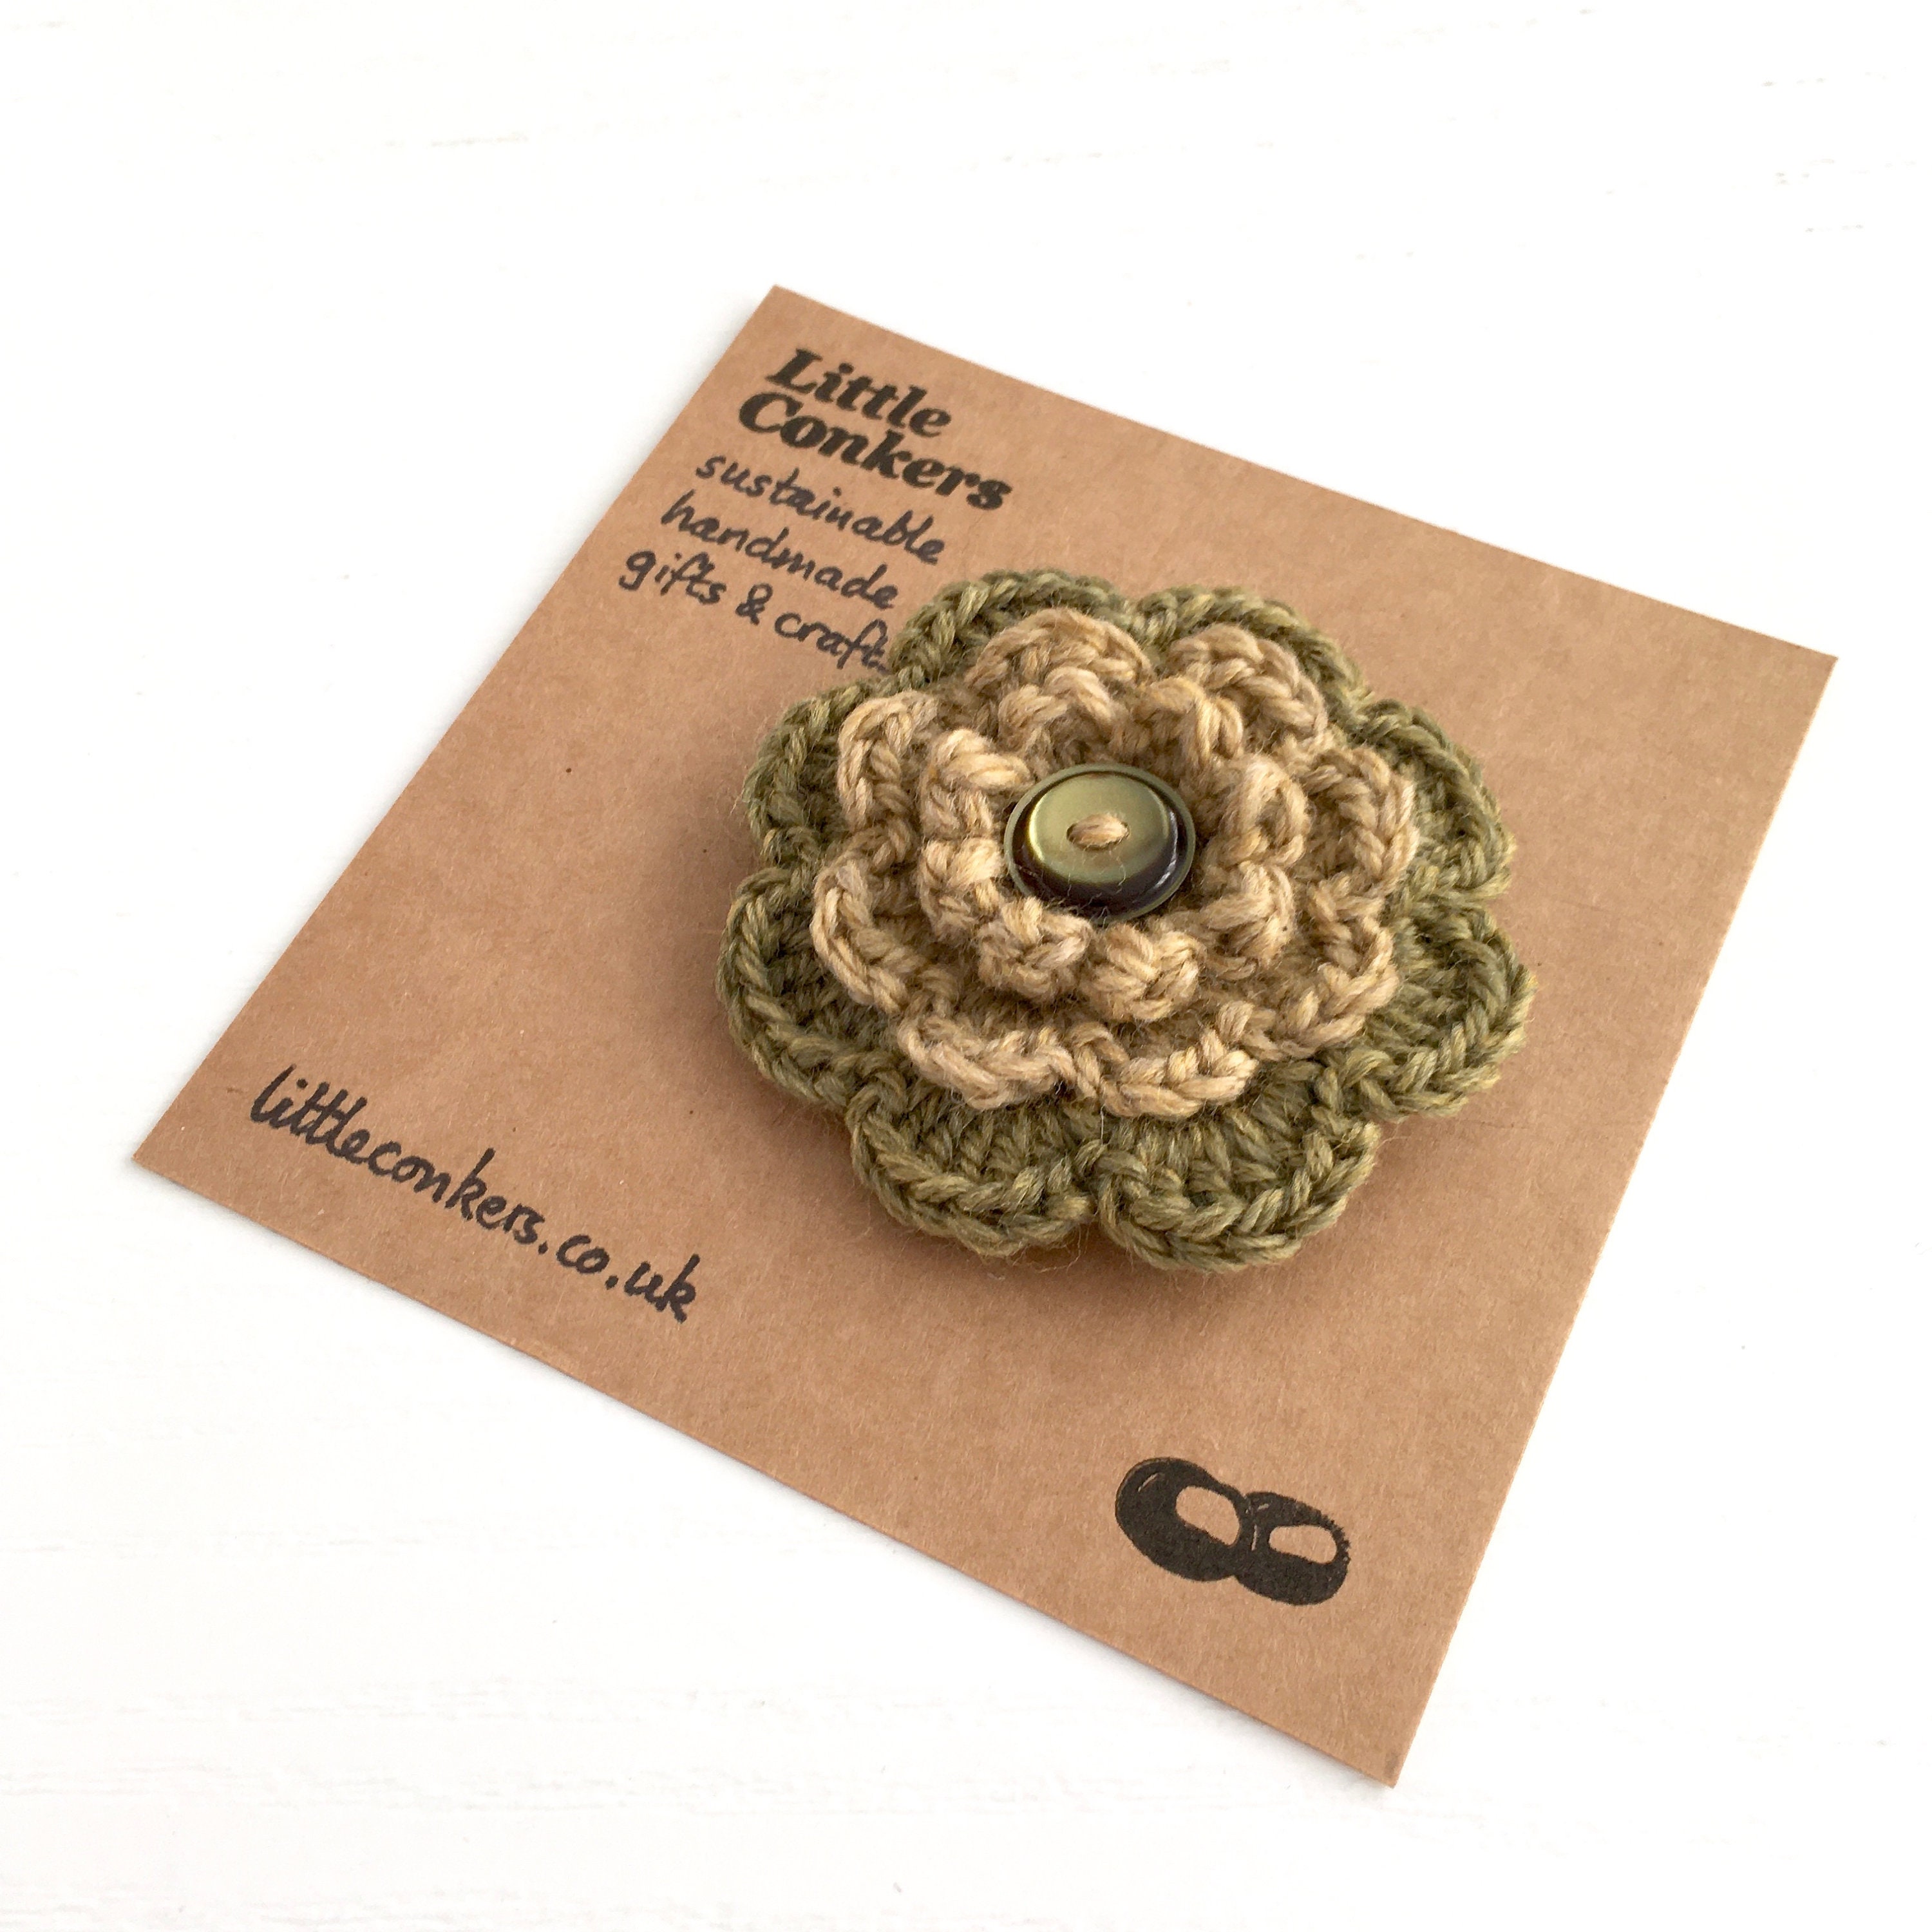 Green & Gold Brooch Eco-Friendly Gift For Mum Stocking Filler Organic Wool Handmade Flower Recycled Small/Her